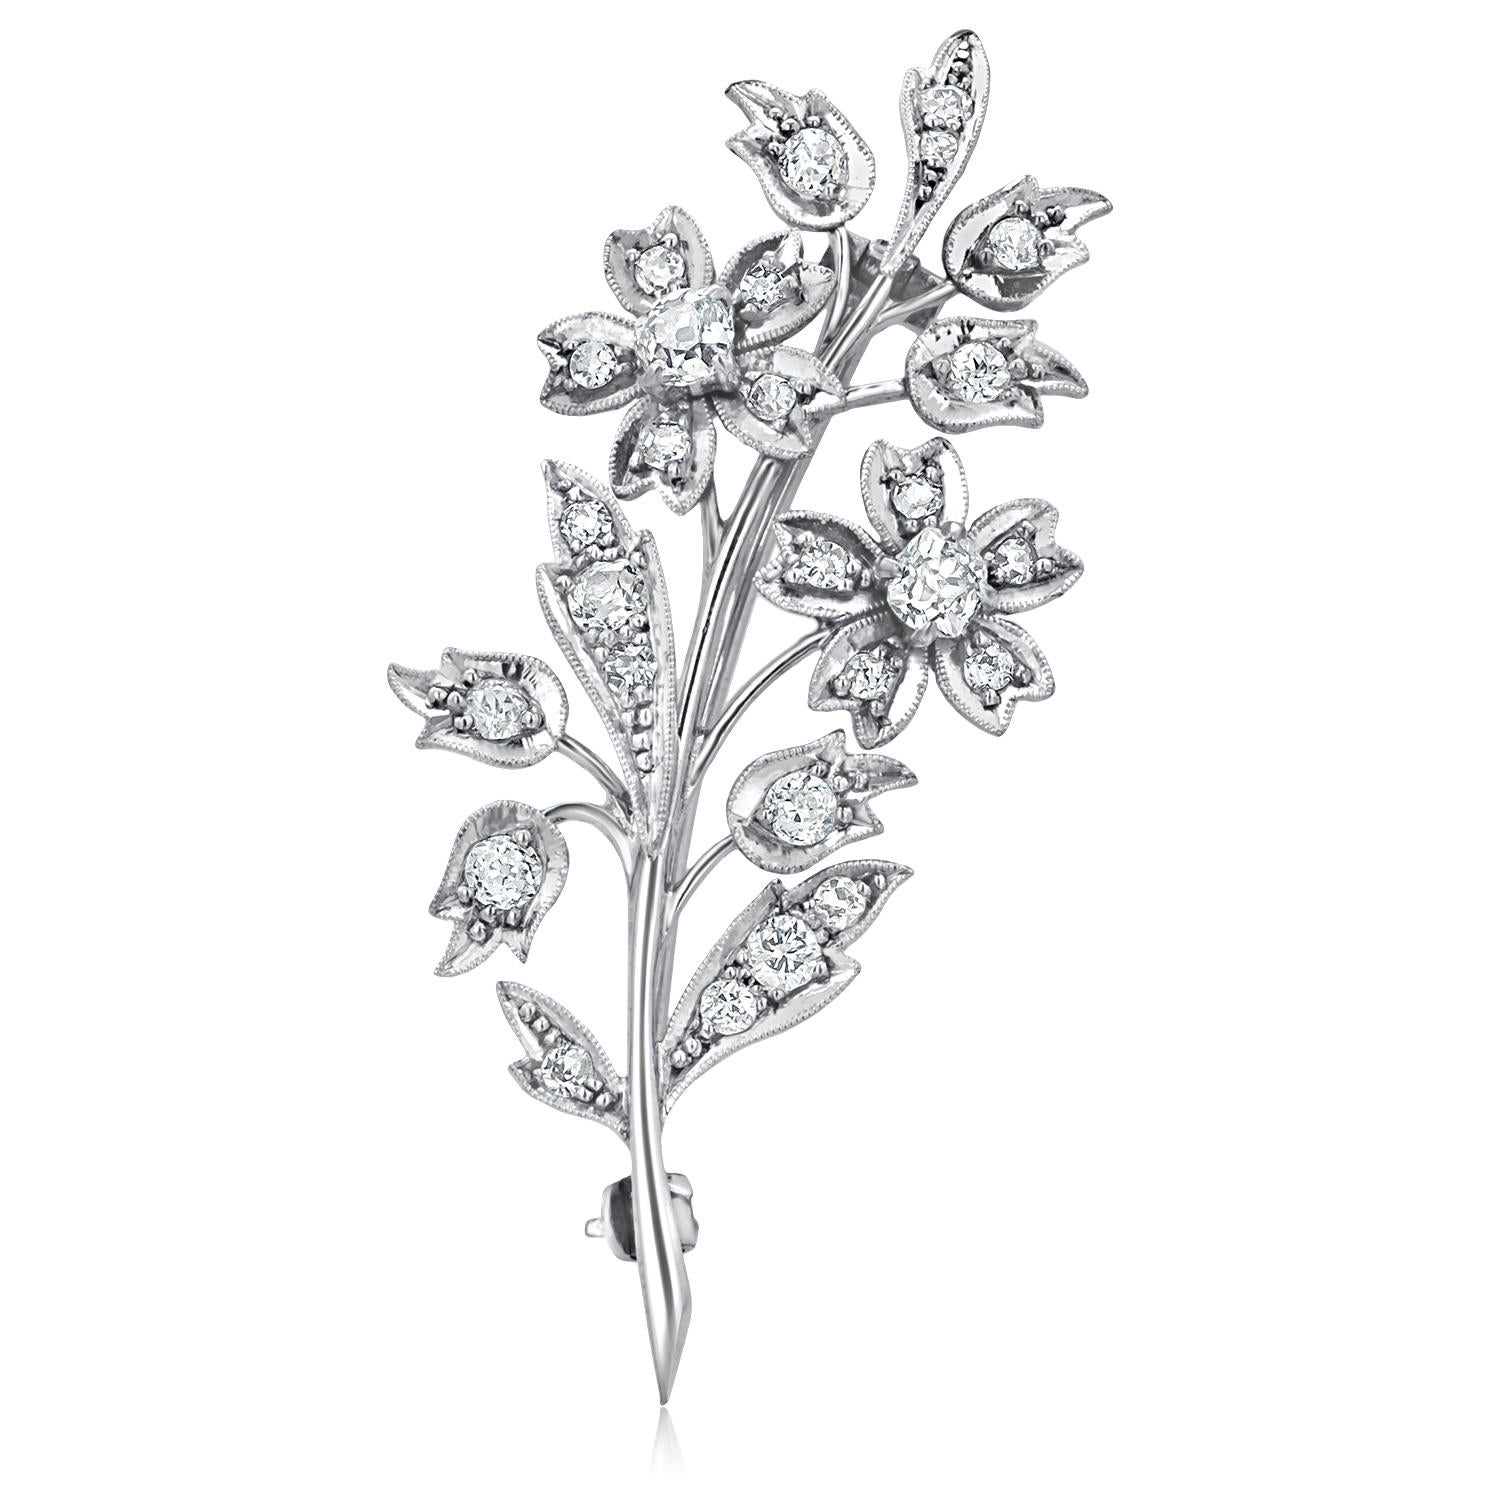 English Vintage 18 Karat White Gold Diamond 1 Carat Flower 2.2 Inch Long Brooch  In Good Condition For Sale In New York, NY